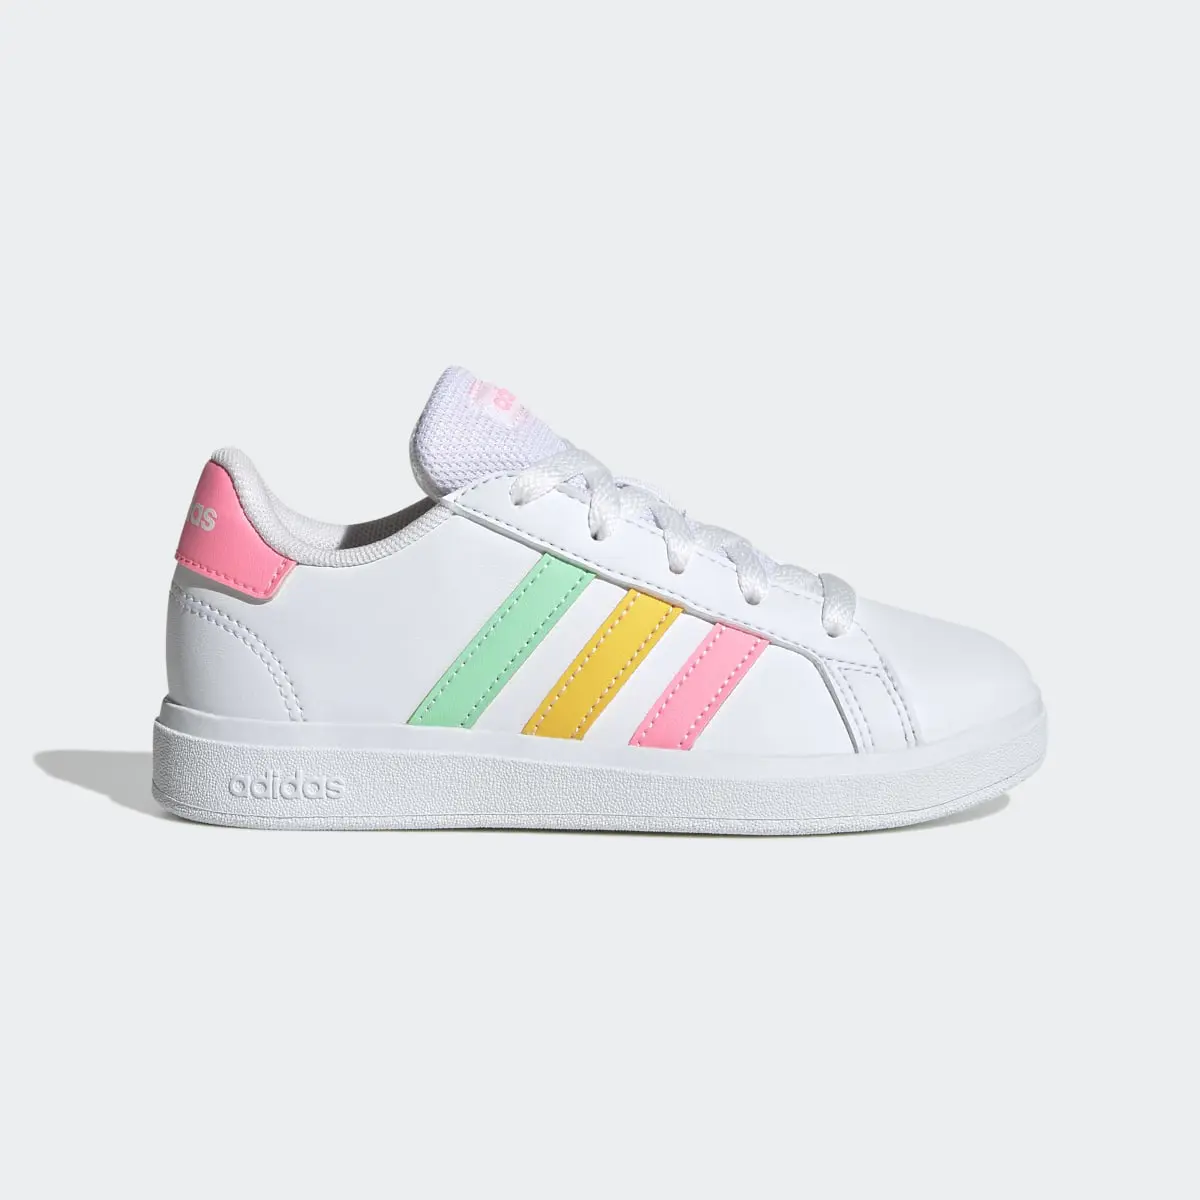 Adidas Grand Court Lifestyle Tennis Lace-Up Shoes. 2